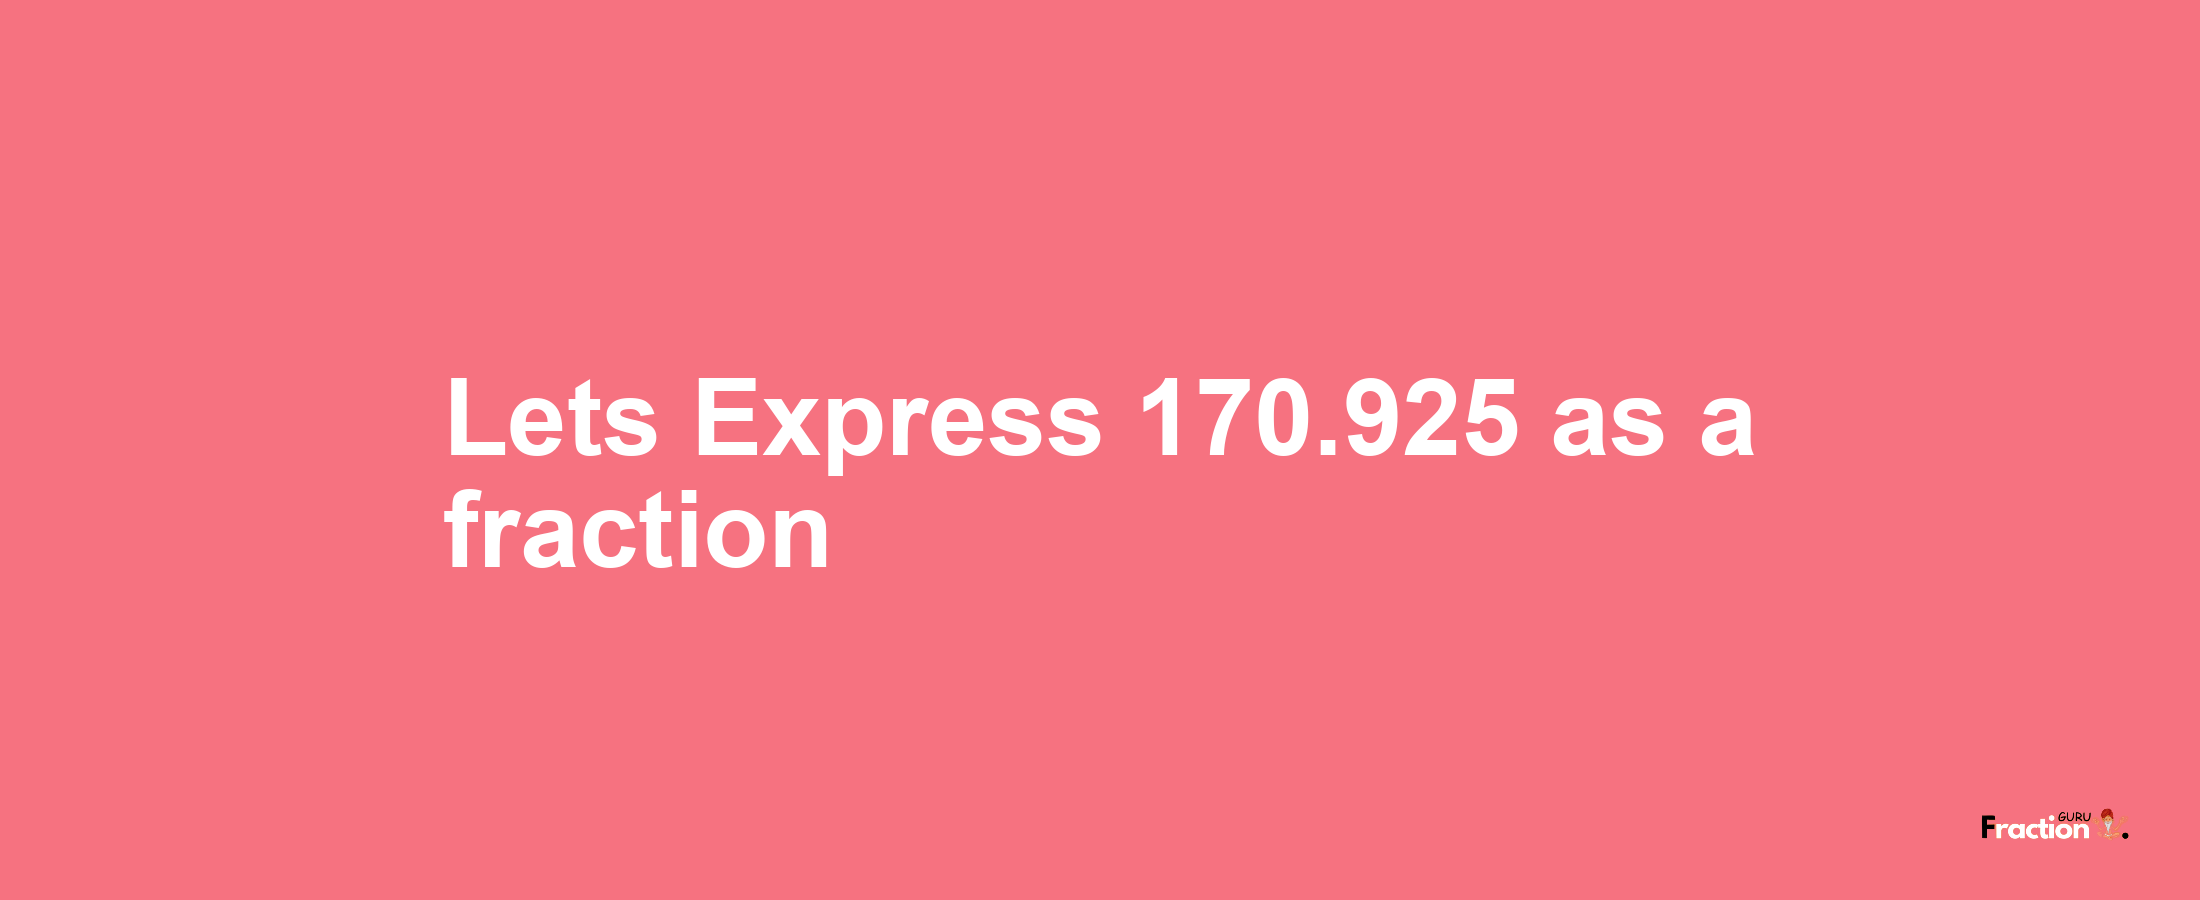 Lets Express 170.925 as afraction